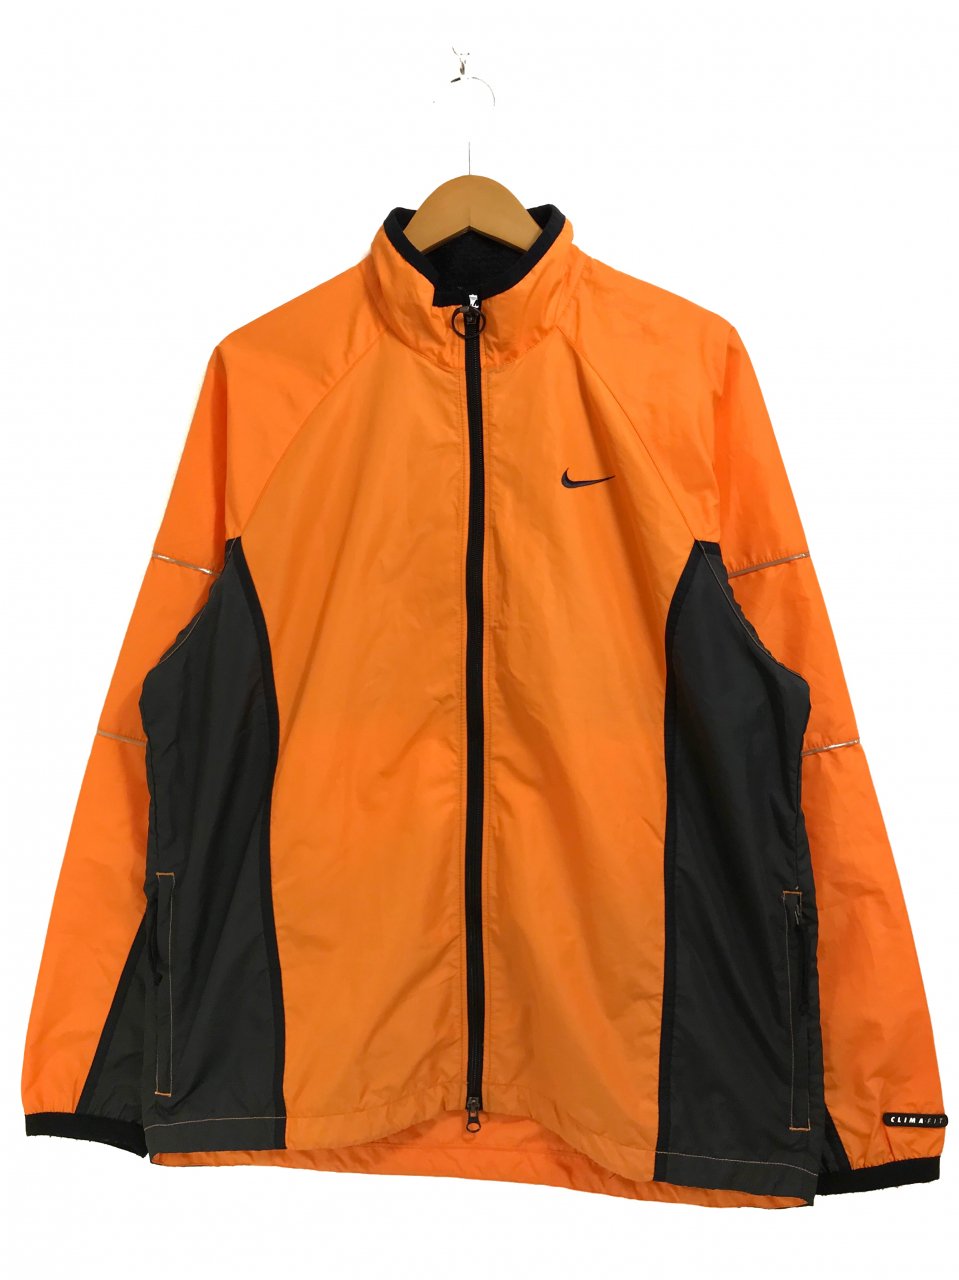 90s NIKE CLIMA-FIT Track Jacket オレンジ黒 L 銀タグ ナイキ ...